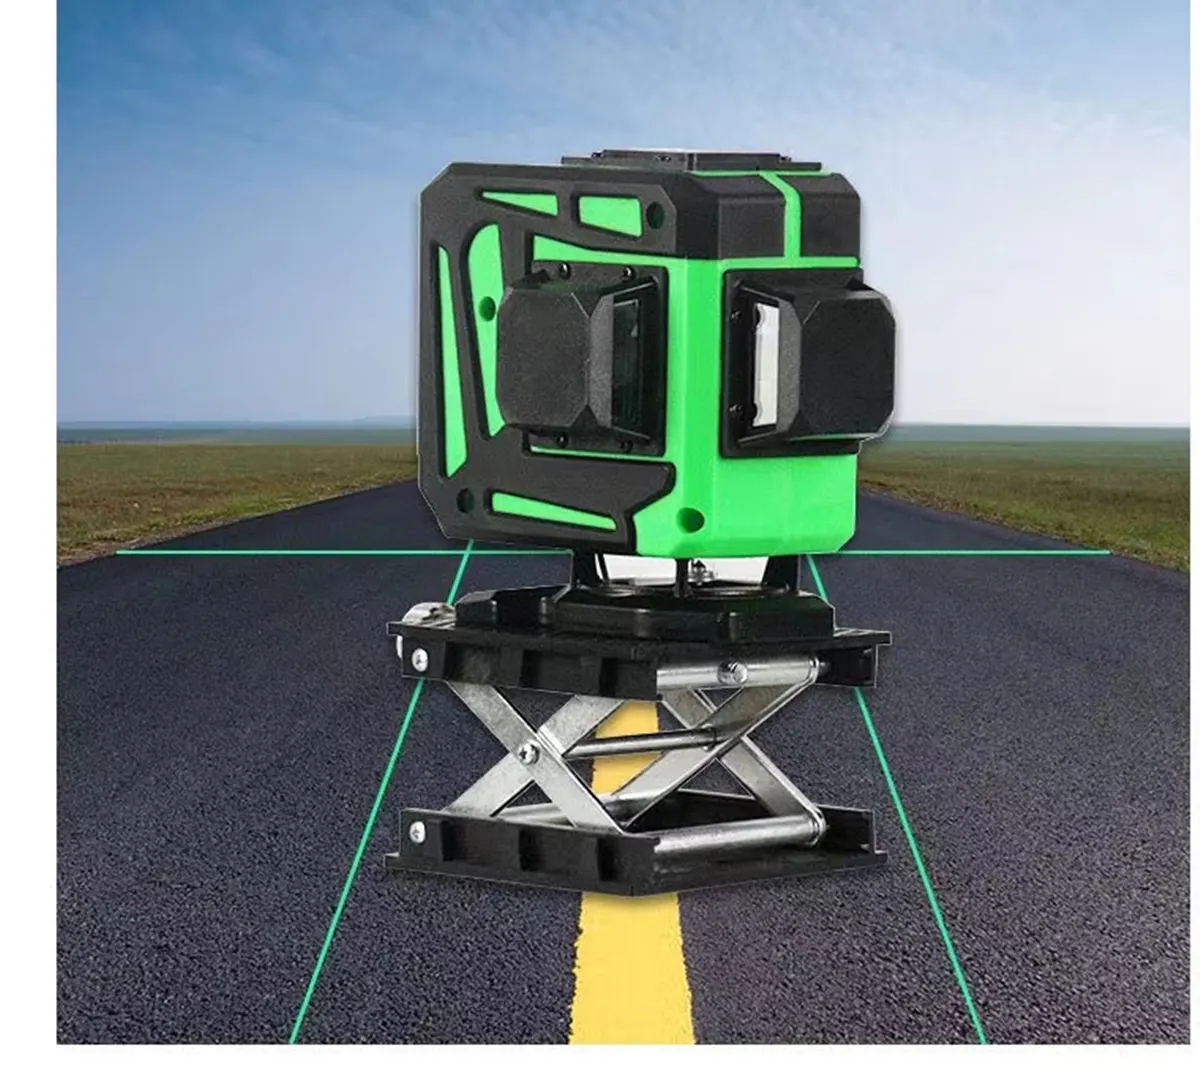 Best Selling Automatic Leveling System Design High Precision 4d 16 Line Laser Level With Green Beam